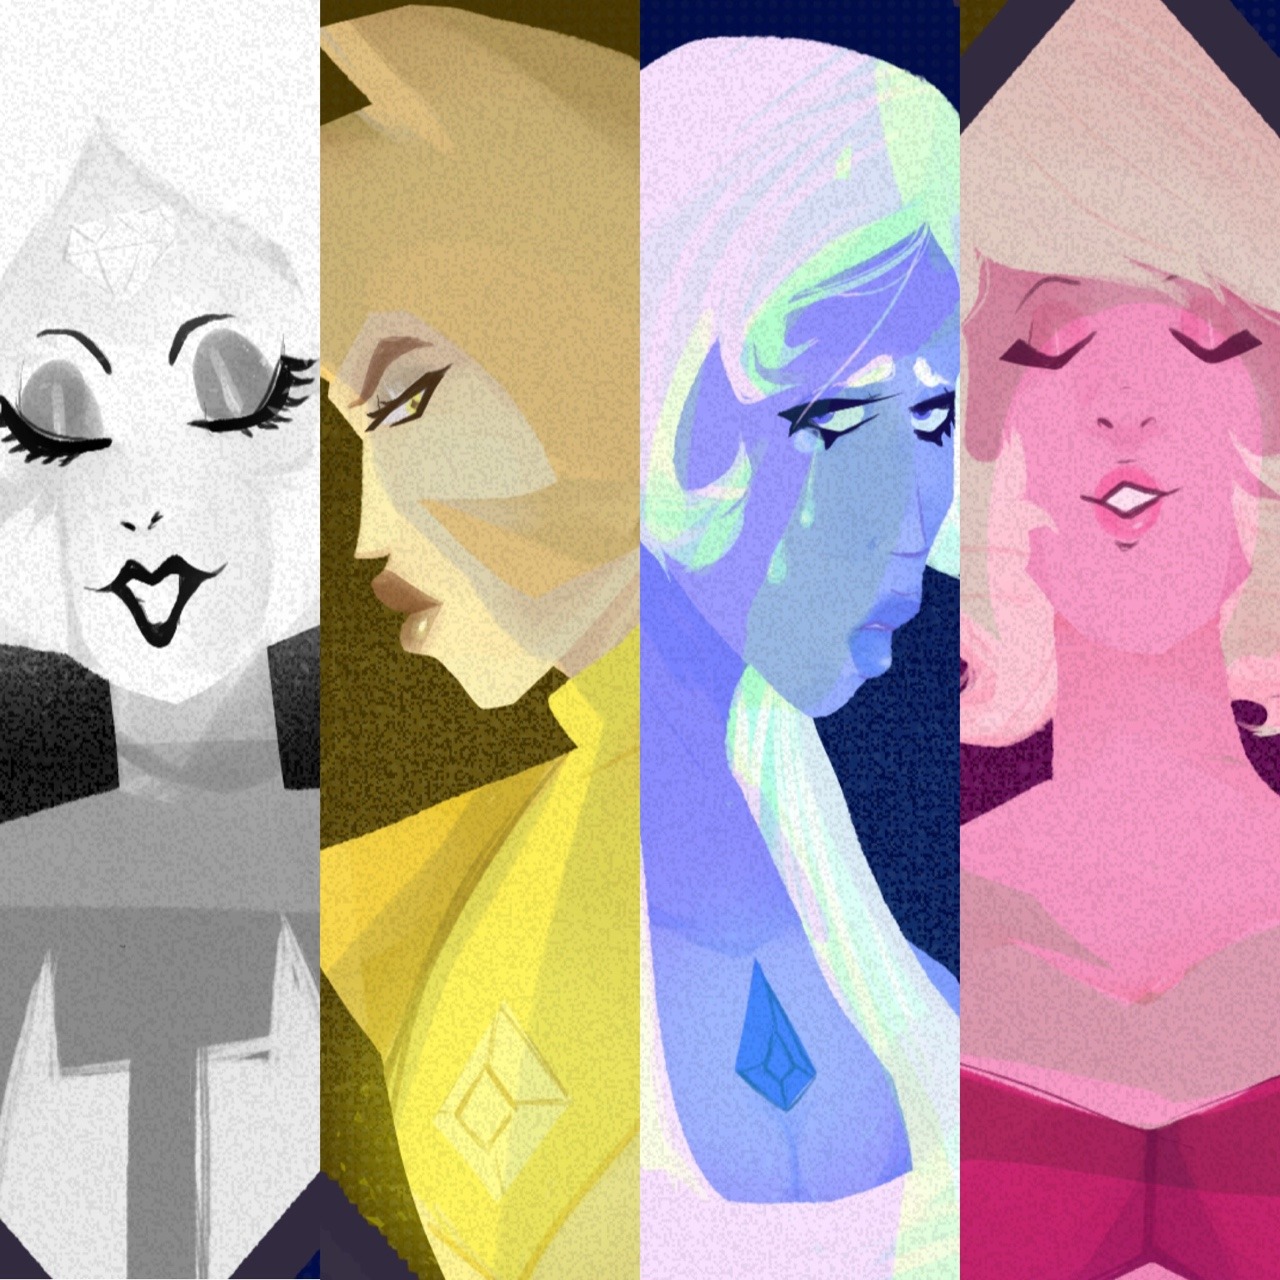 THE DIAMOND AUTHORITY… since all the diamonds’ designs were finally released I felt like redrawing a piece from last year! im super happy with how it came out…. my phone crashed a couple times towards...